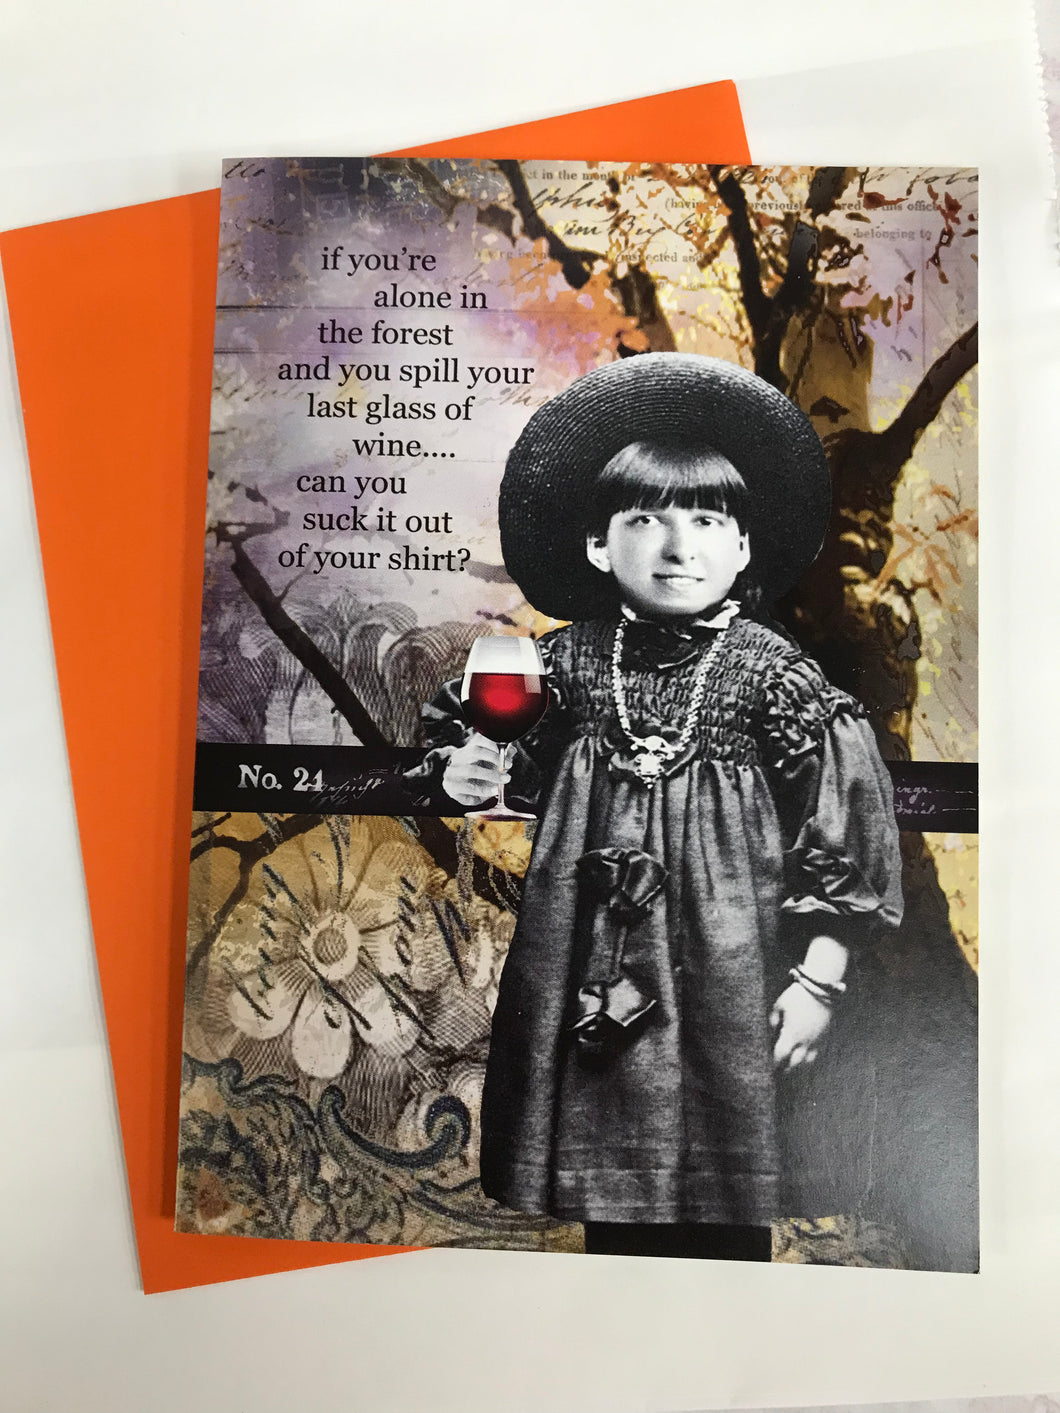 ' if you're alone in the forest and you spill your wine... '   Greeting Card by Erin Smith